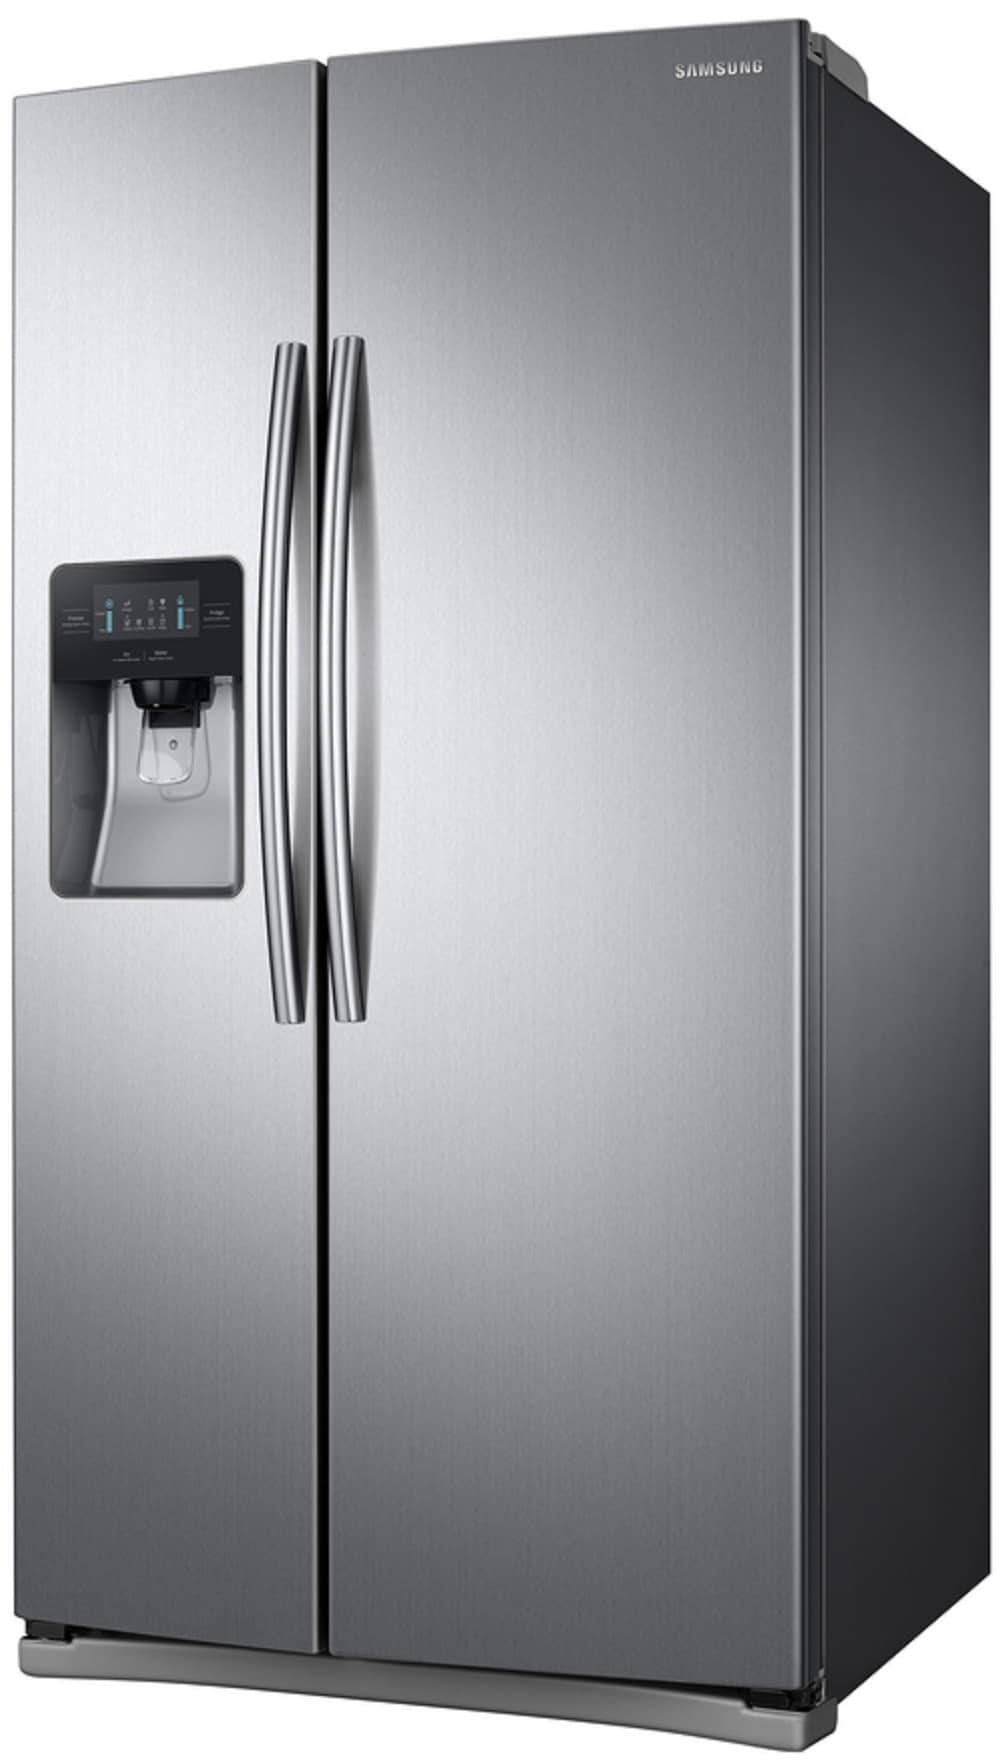 Samsung 24 52 Cu Ft Side By